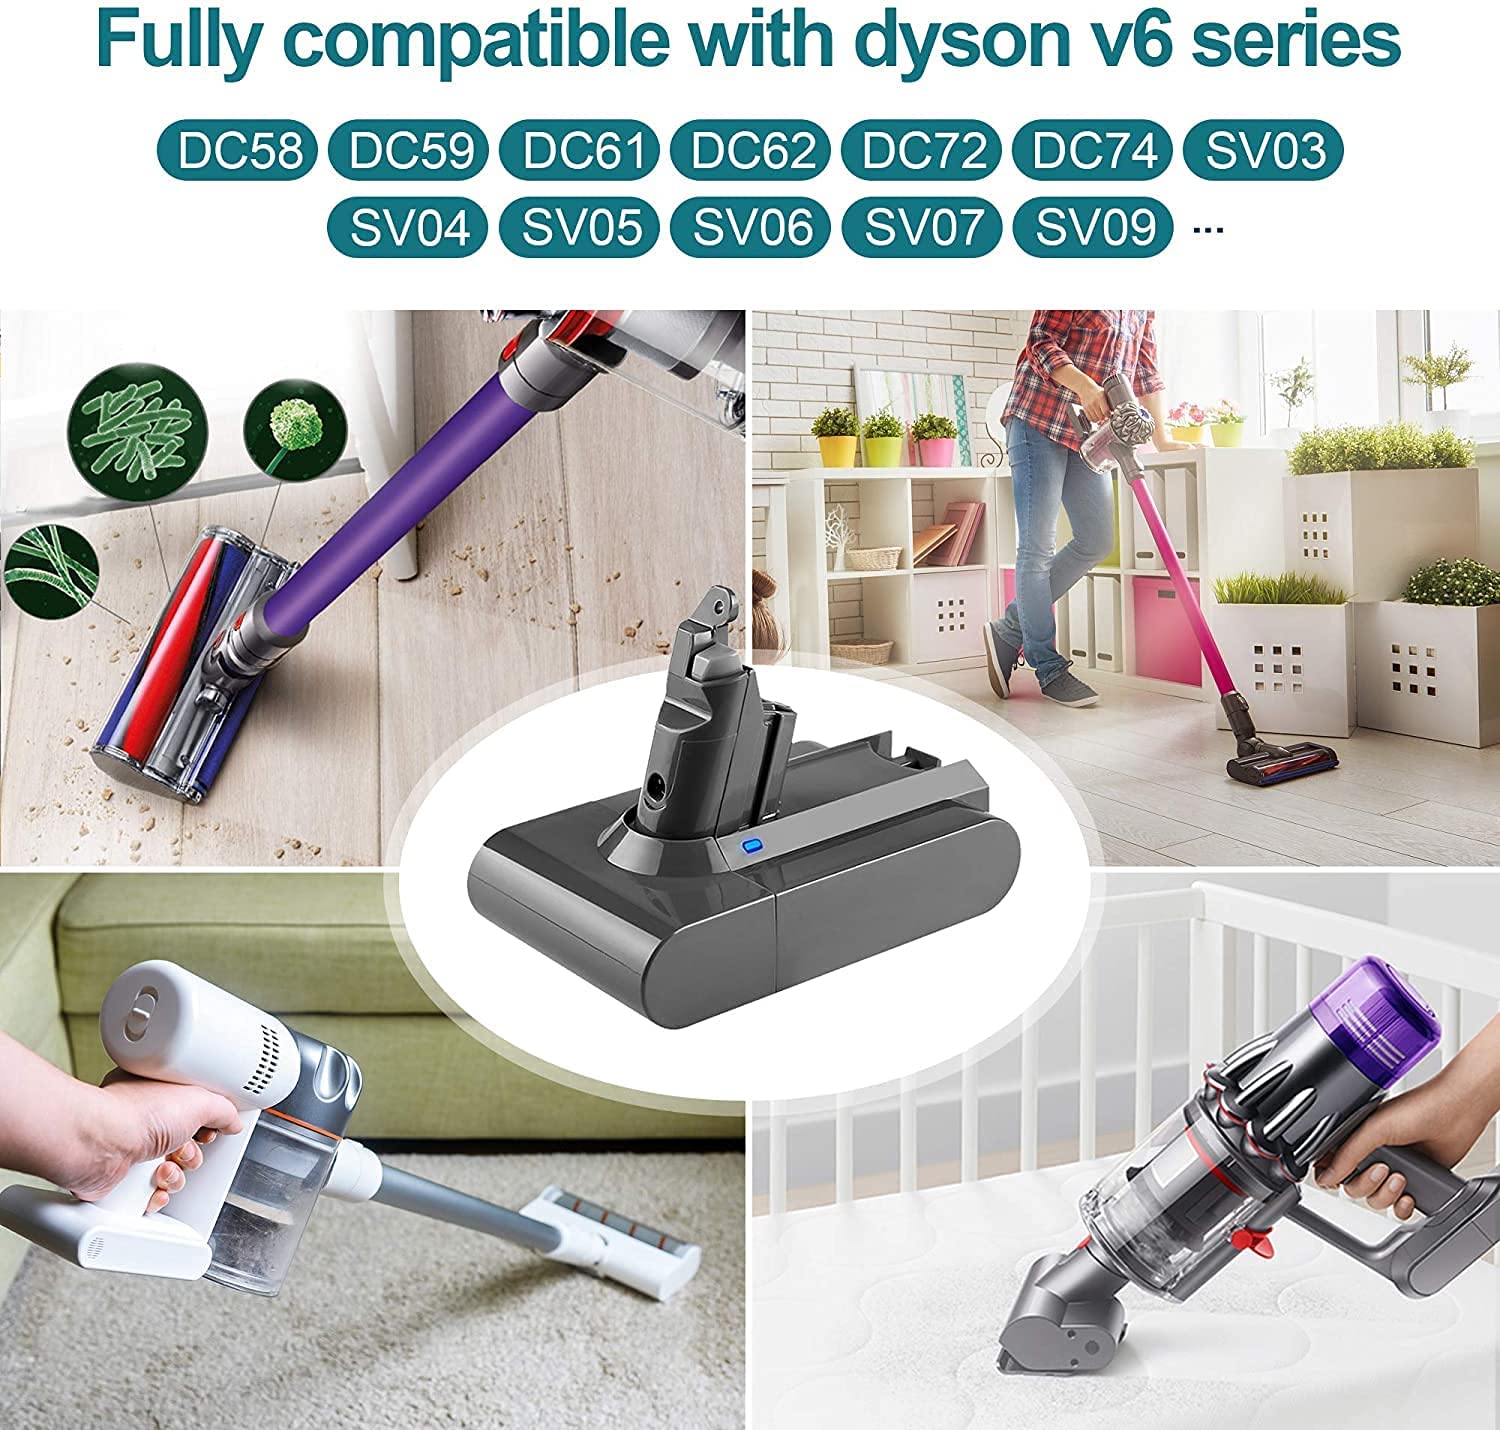 Replacing Dyson SV09 Vacuum Battery: Tips and Maintenance